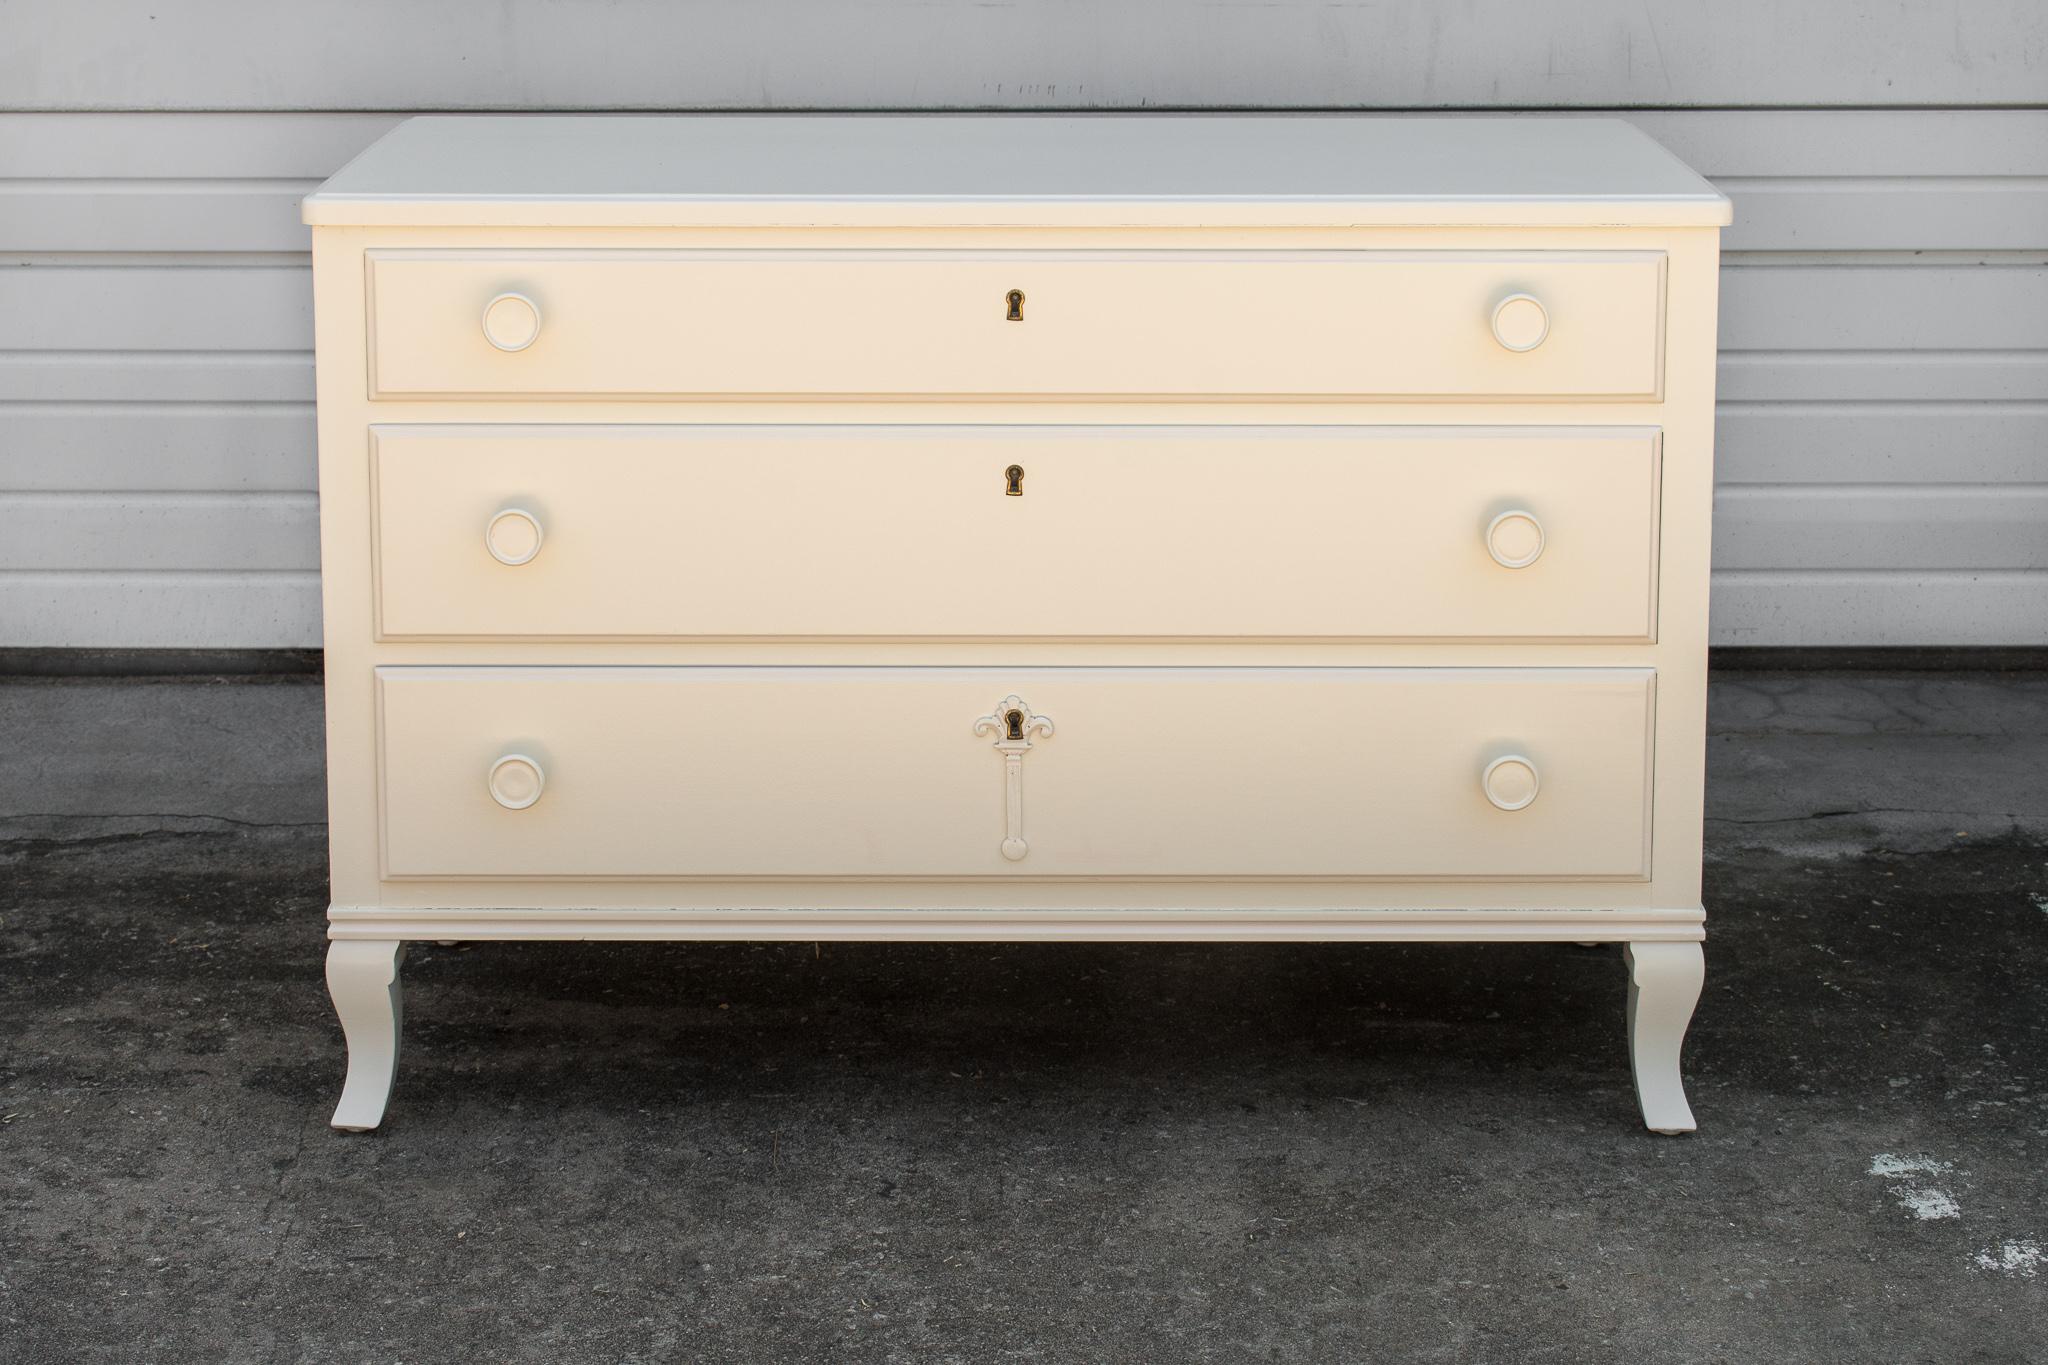 Art Moderne chest of drawers from Sweden, circa 1940. This painted chest of drawers is painted a lovely antique off-white, sits on curved legs and has round drawer pulls and escutcheon ornament on the bottom drawer. All dove-tailed drawers are fully